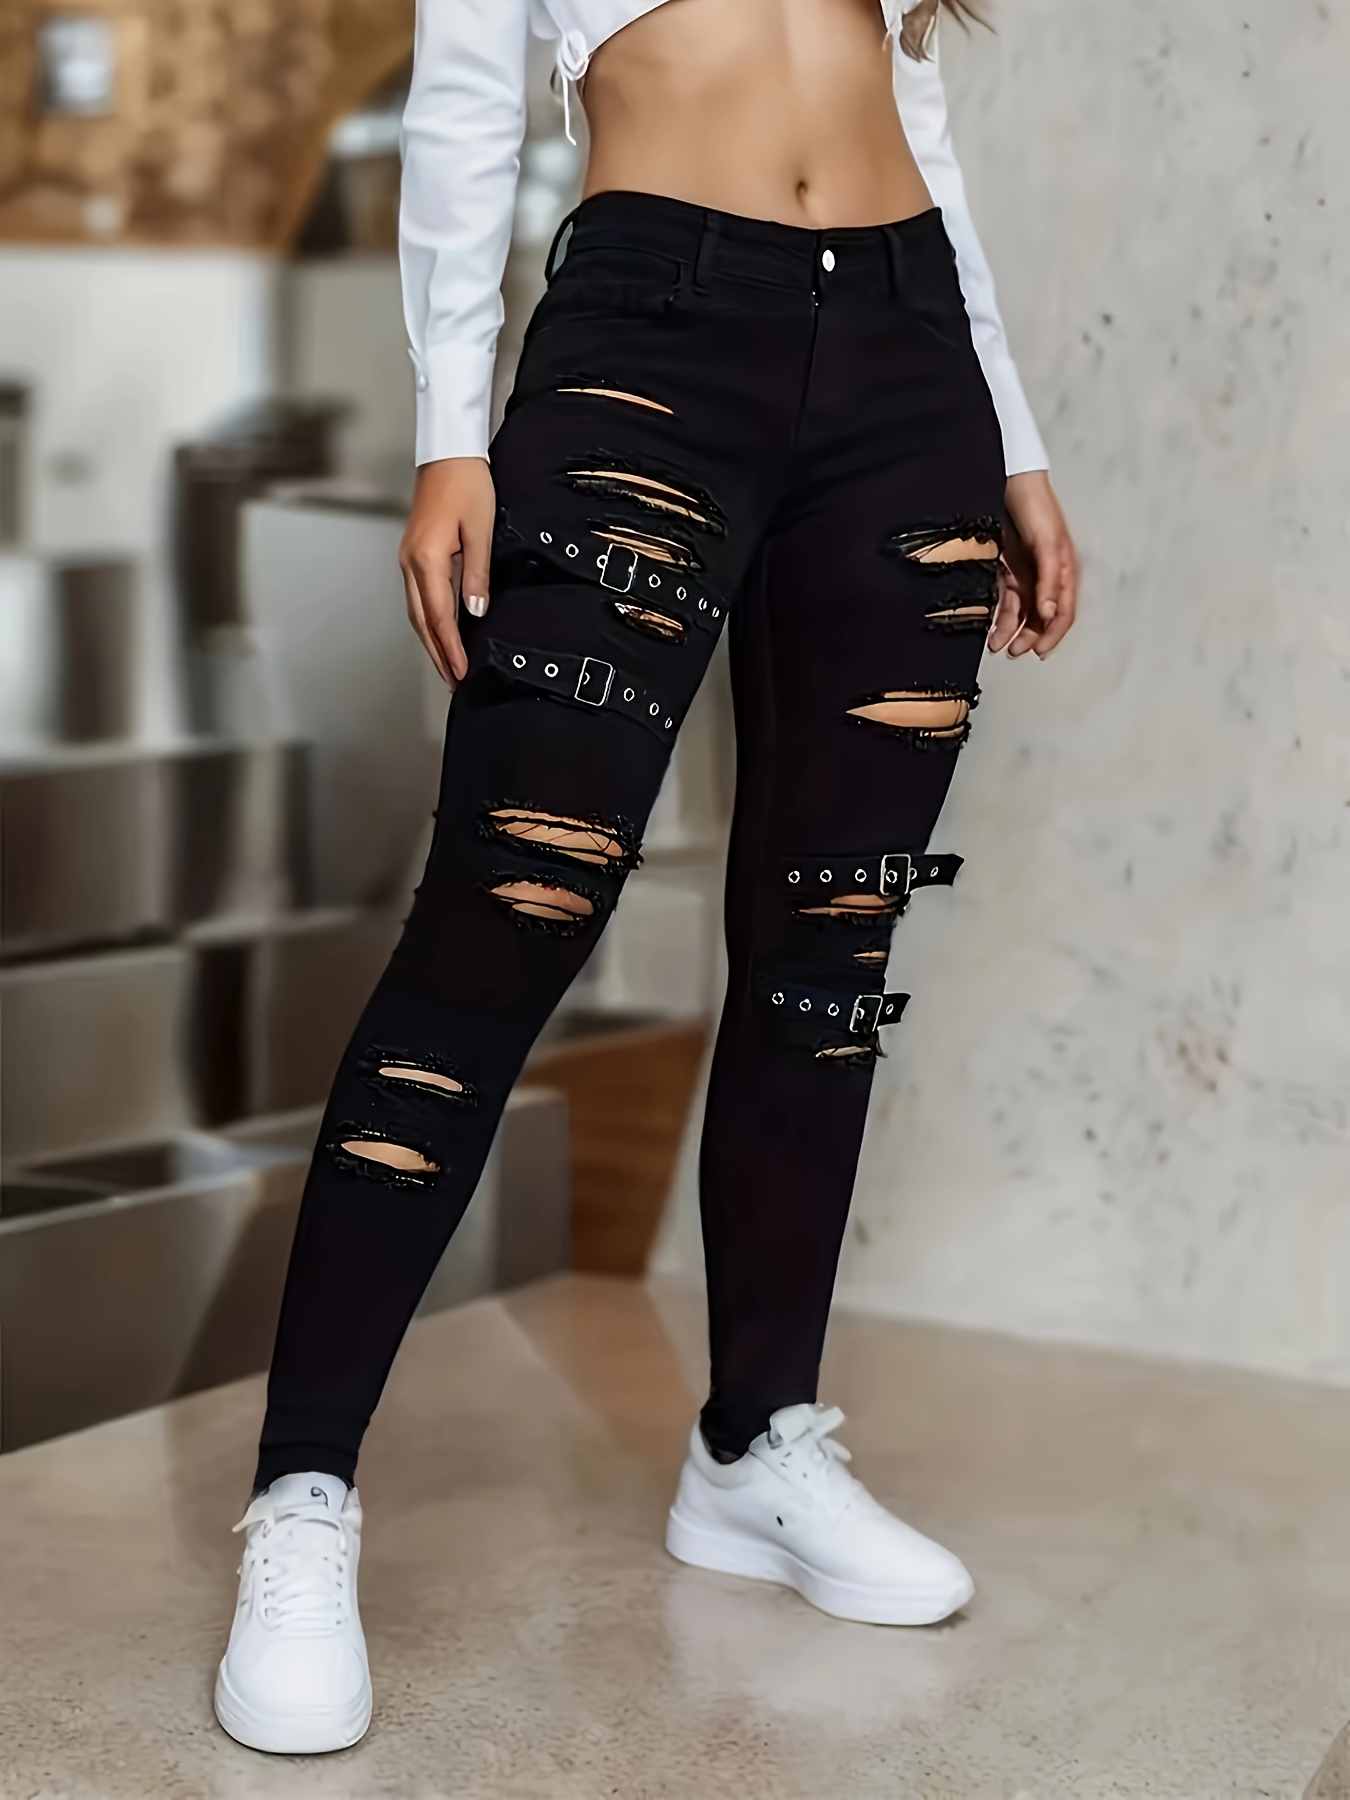 Ripped Holes Chic Skinny Jeans Slim Fit Stretchy Tight Jeans